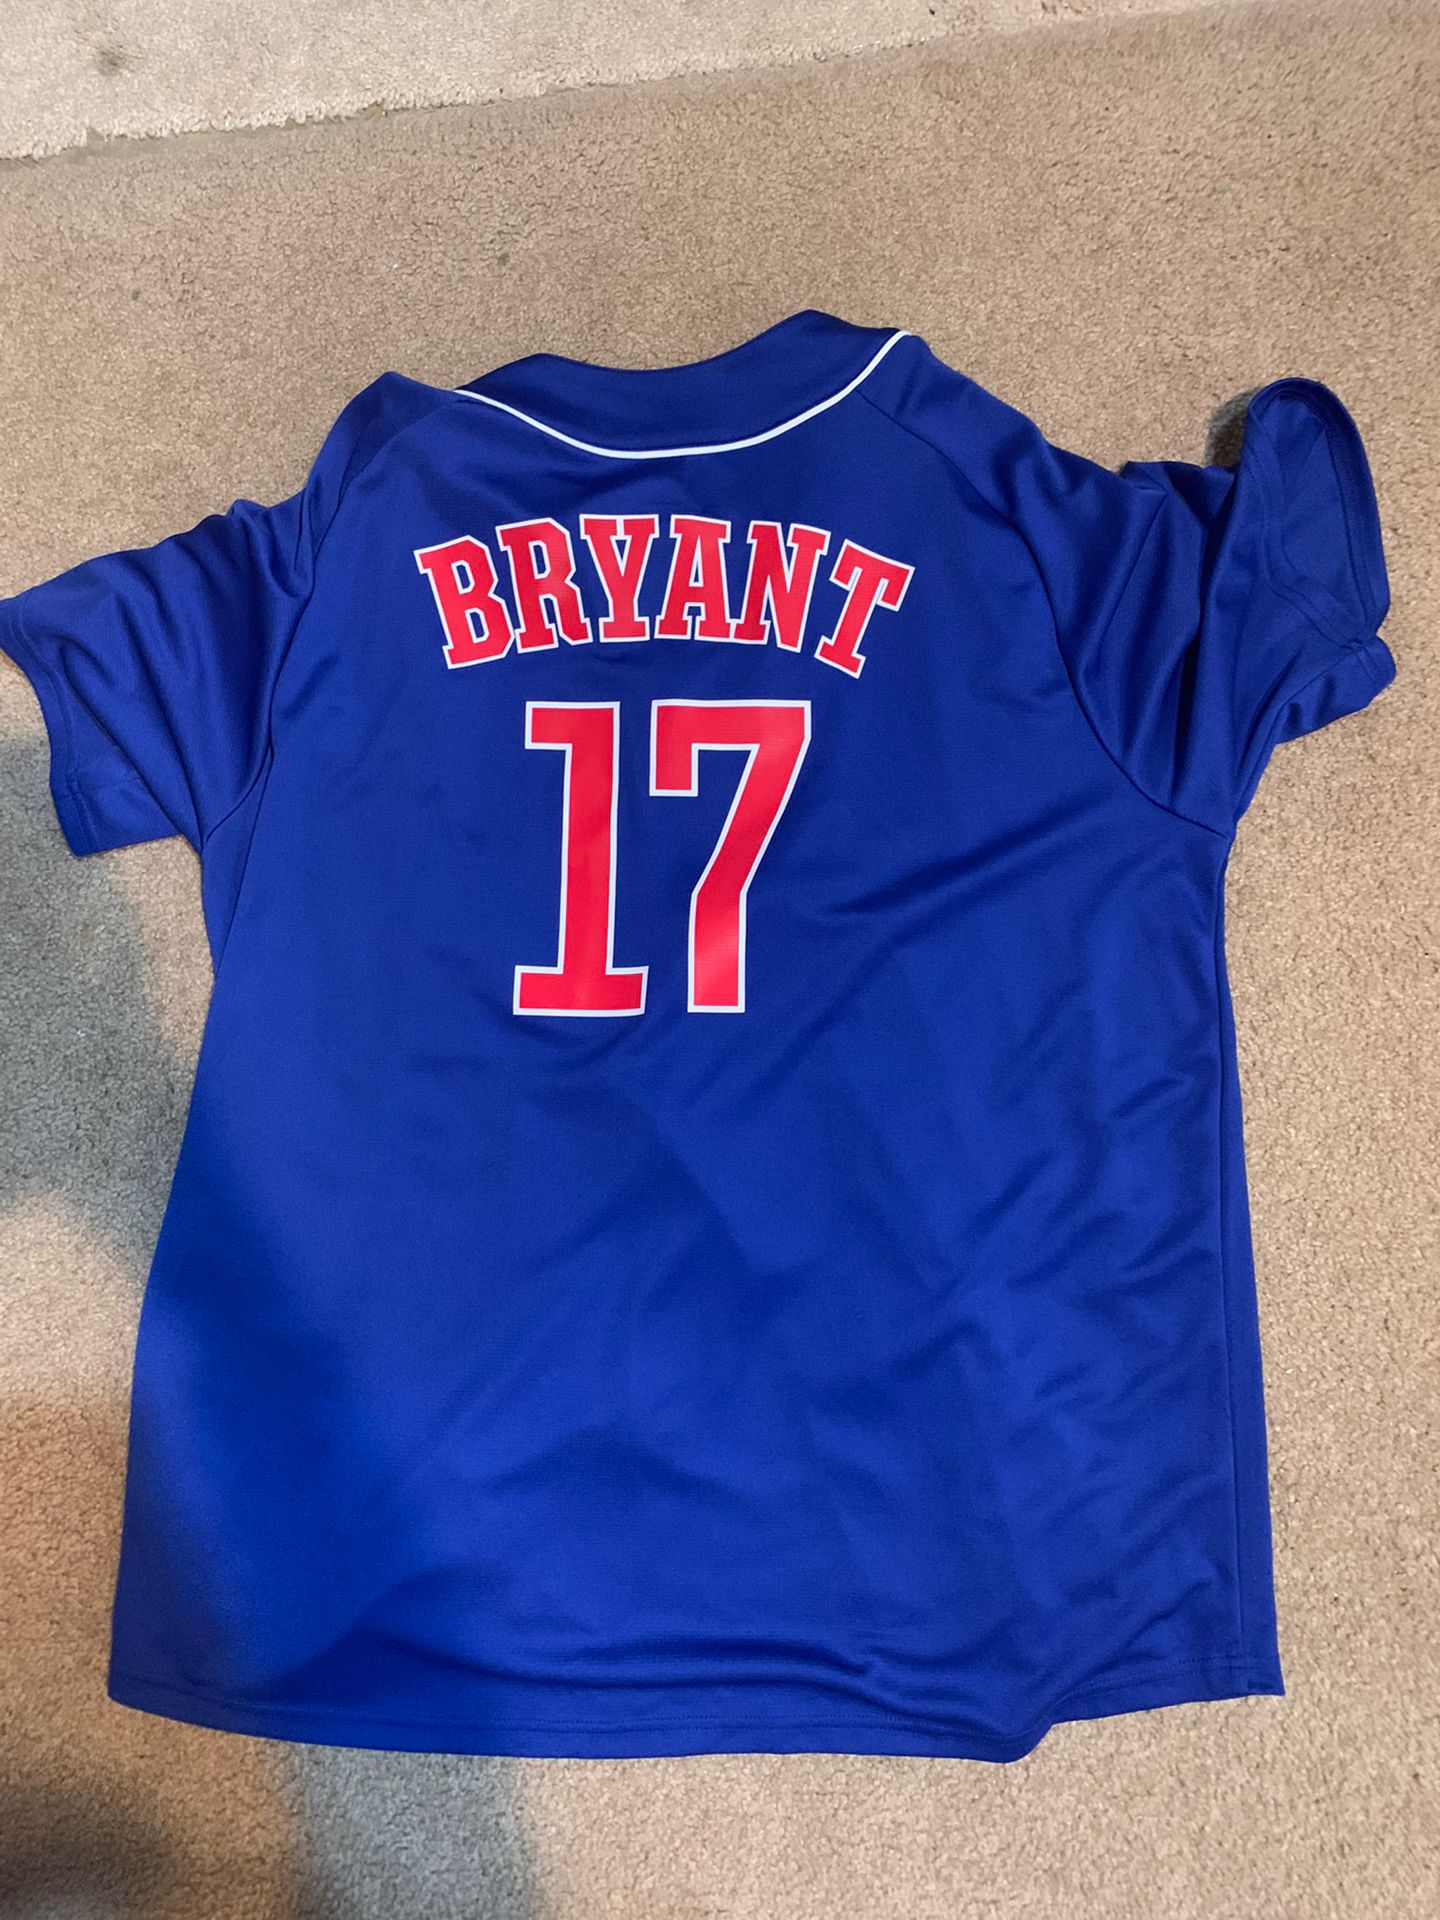 Kris Bryant Chicago Cubs Jersey for Sale in Naperville, IL - OfferUp